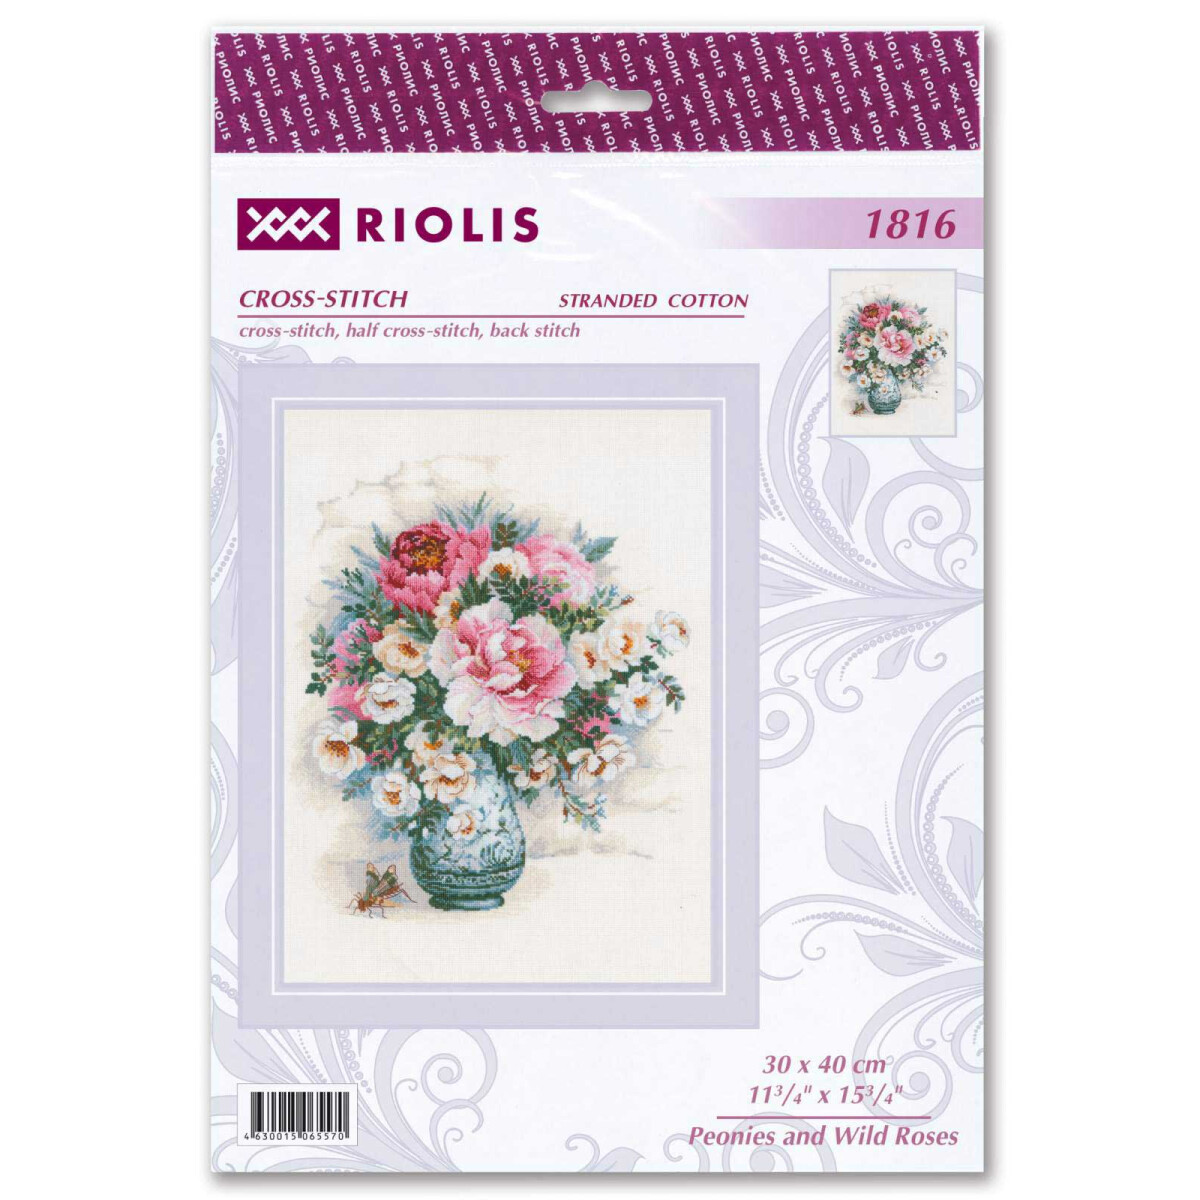 Sweet William Counted Cross Stitch Kit RIOLIS 1463 